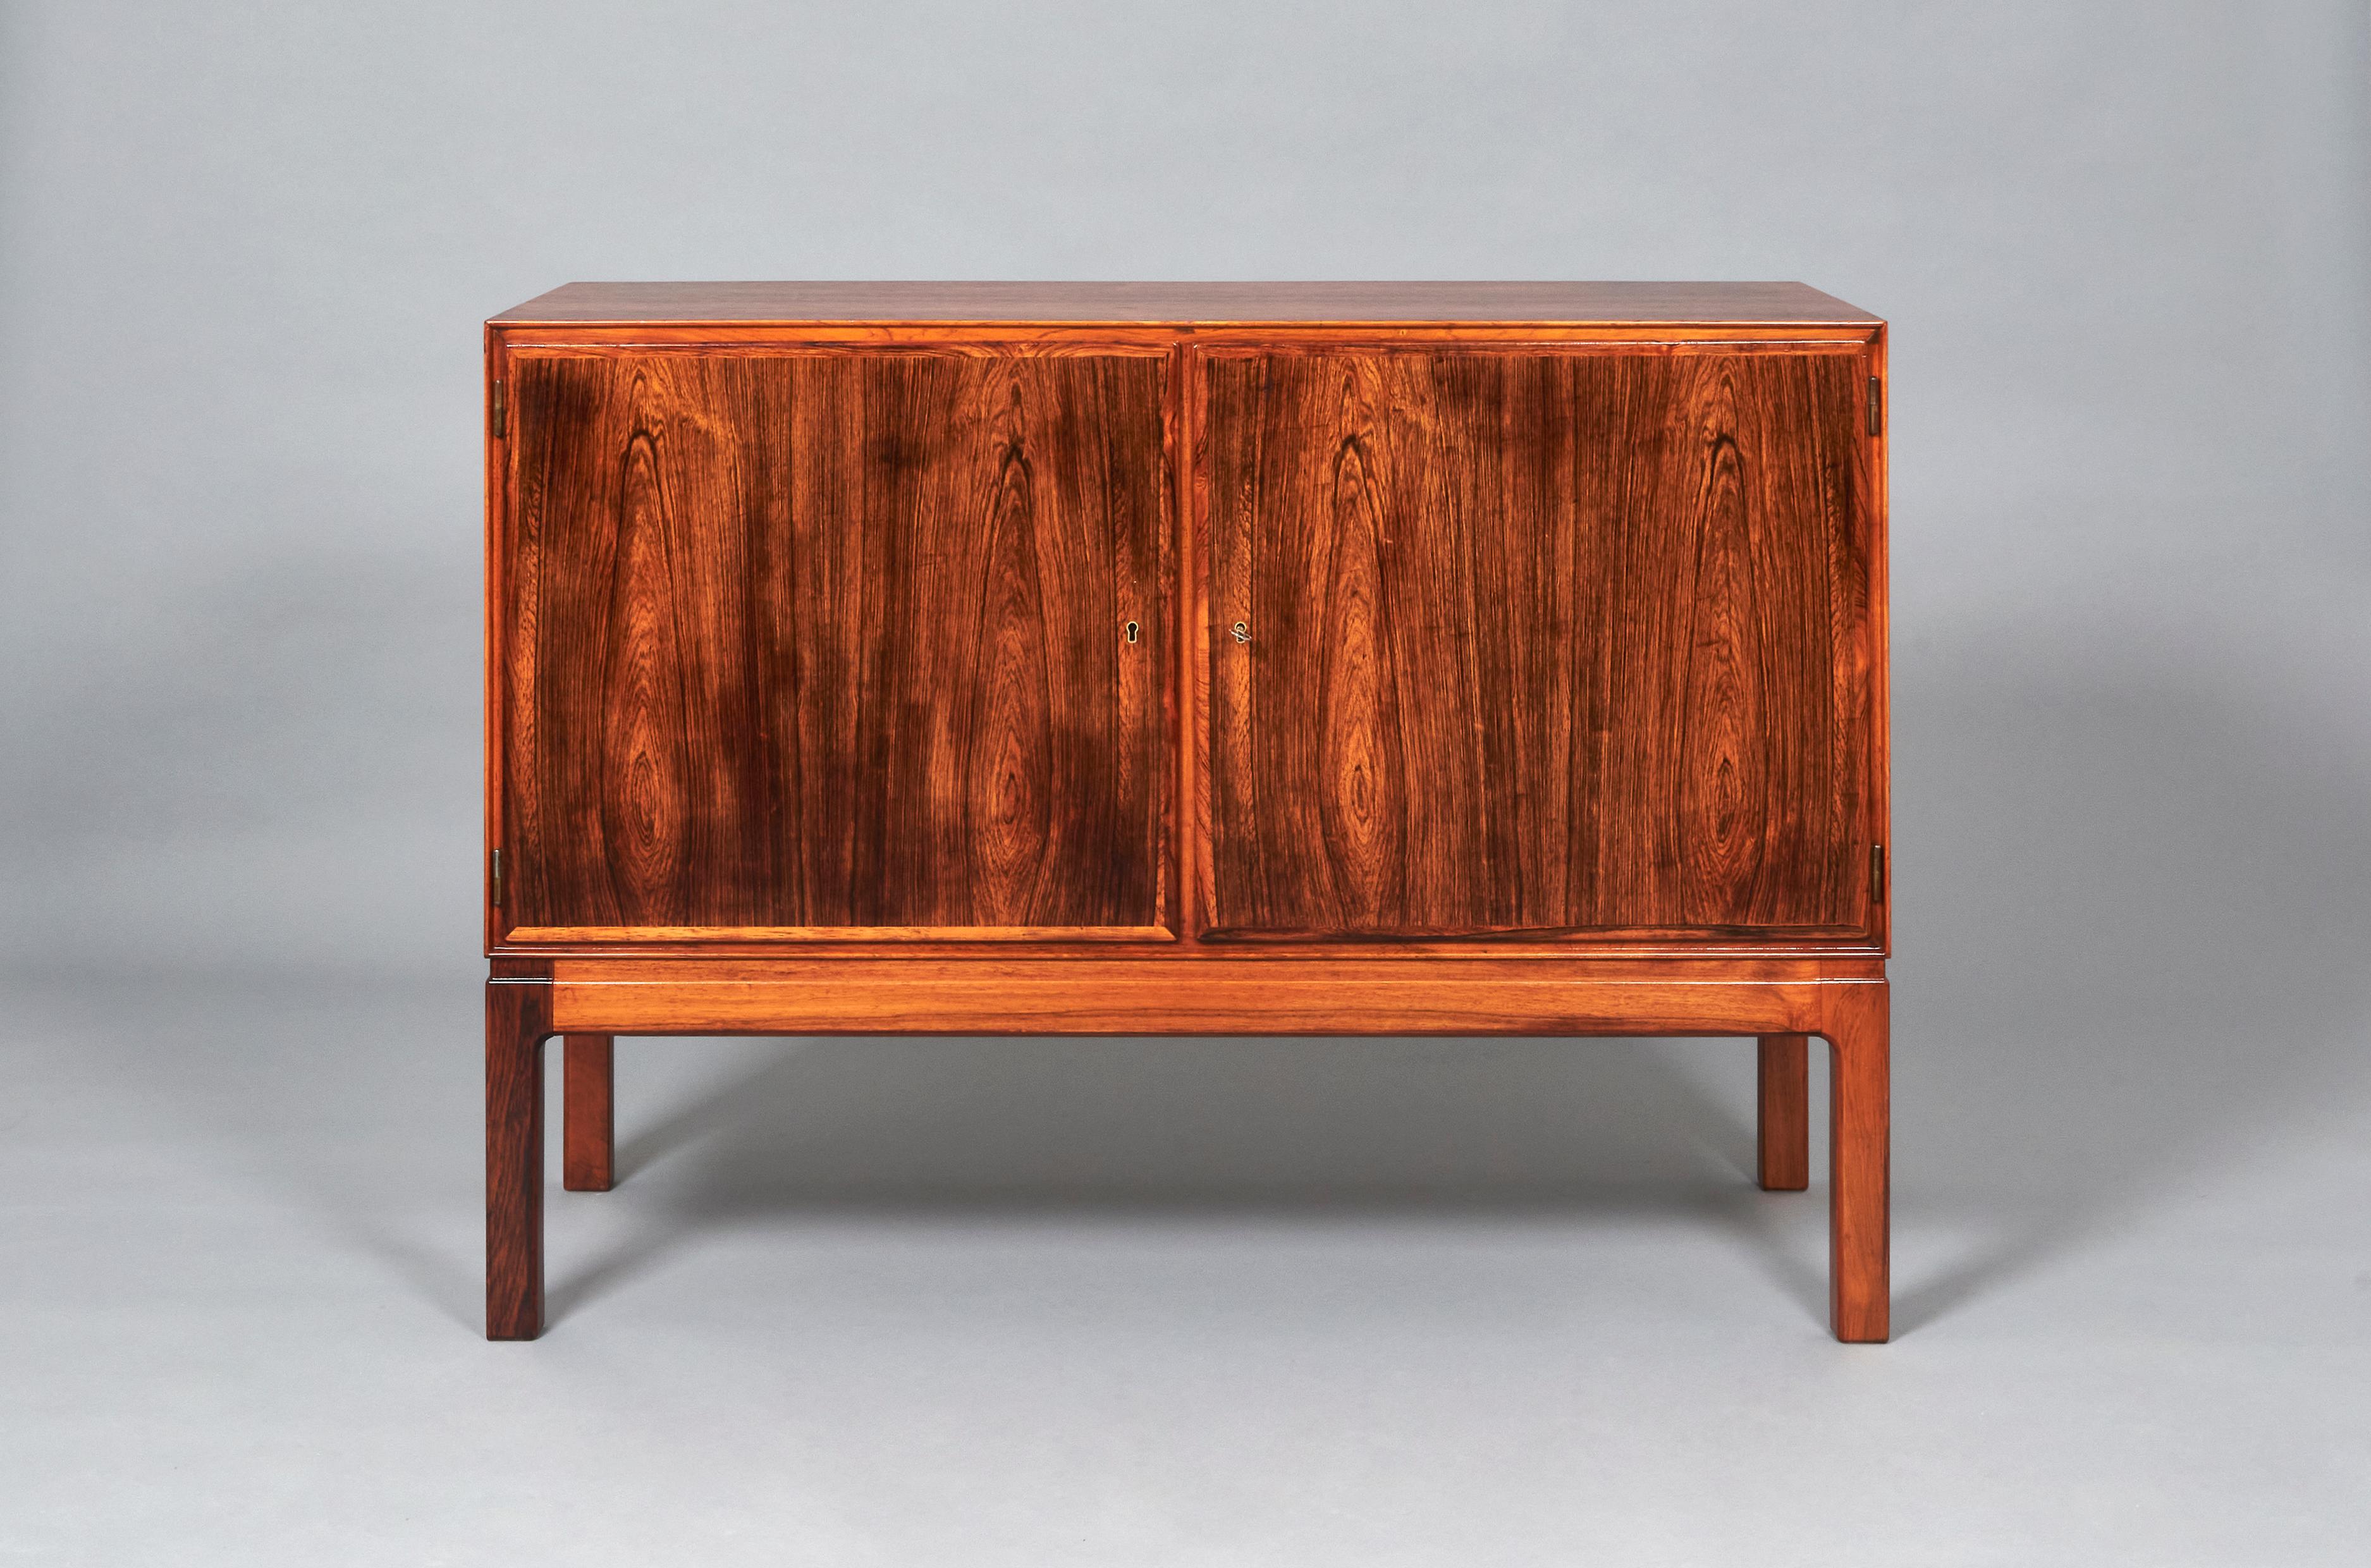 Petite sideboard in Rosewood by anonymous designer made in Sweden in the 1960s.

It features two separated compartments with adjustable shelves and key locked doors. Excellent vintage condition, with a interesting patina due to time and use, it has